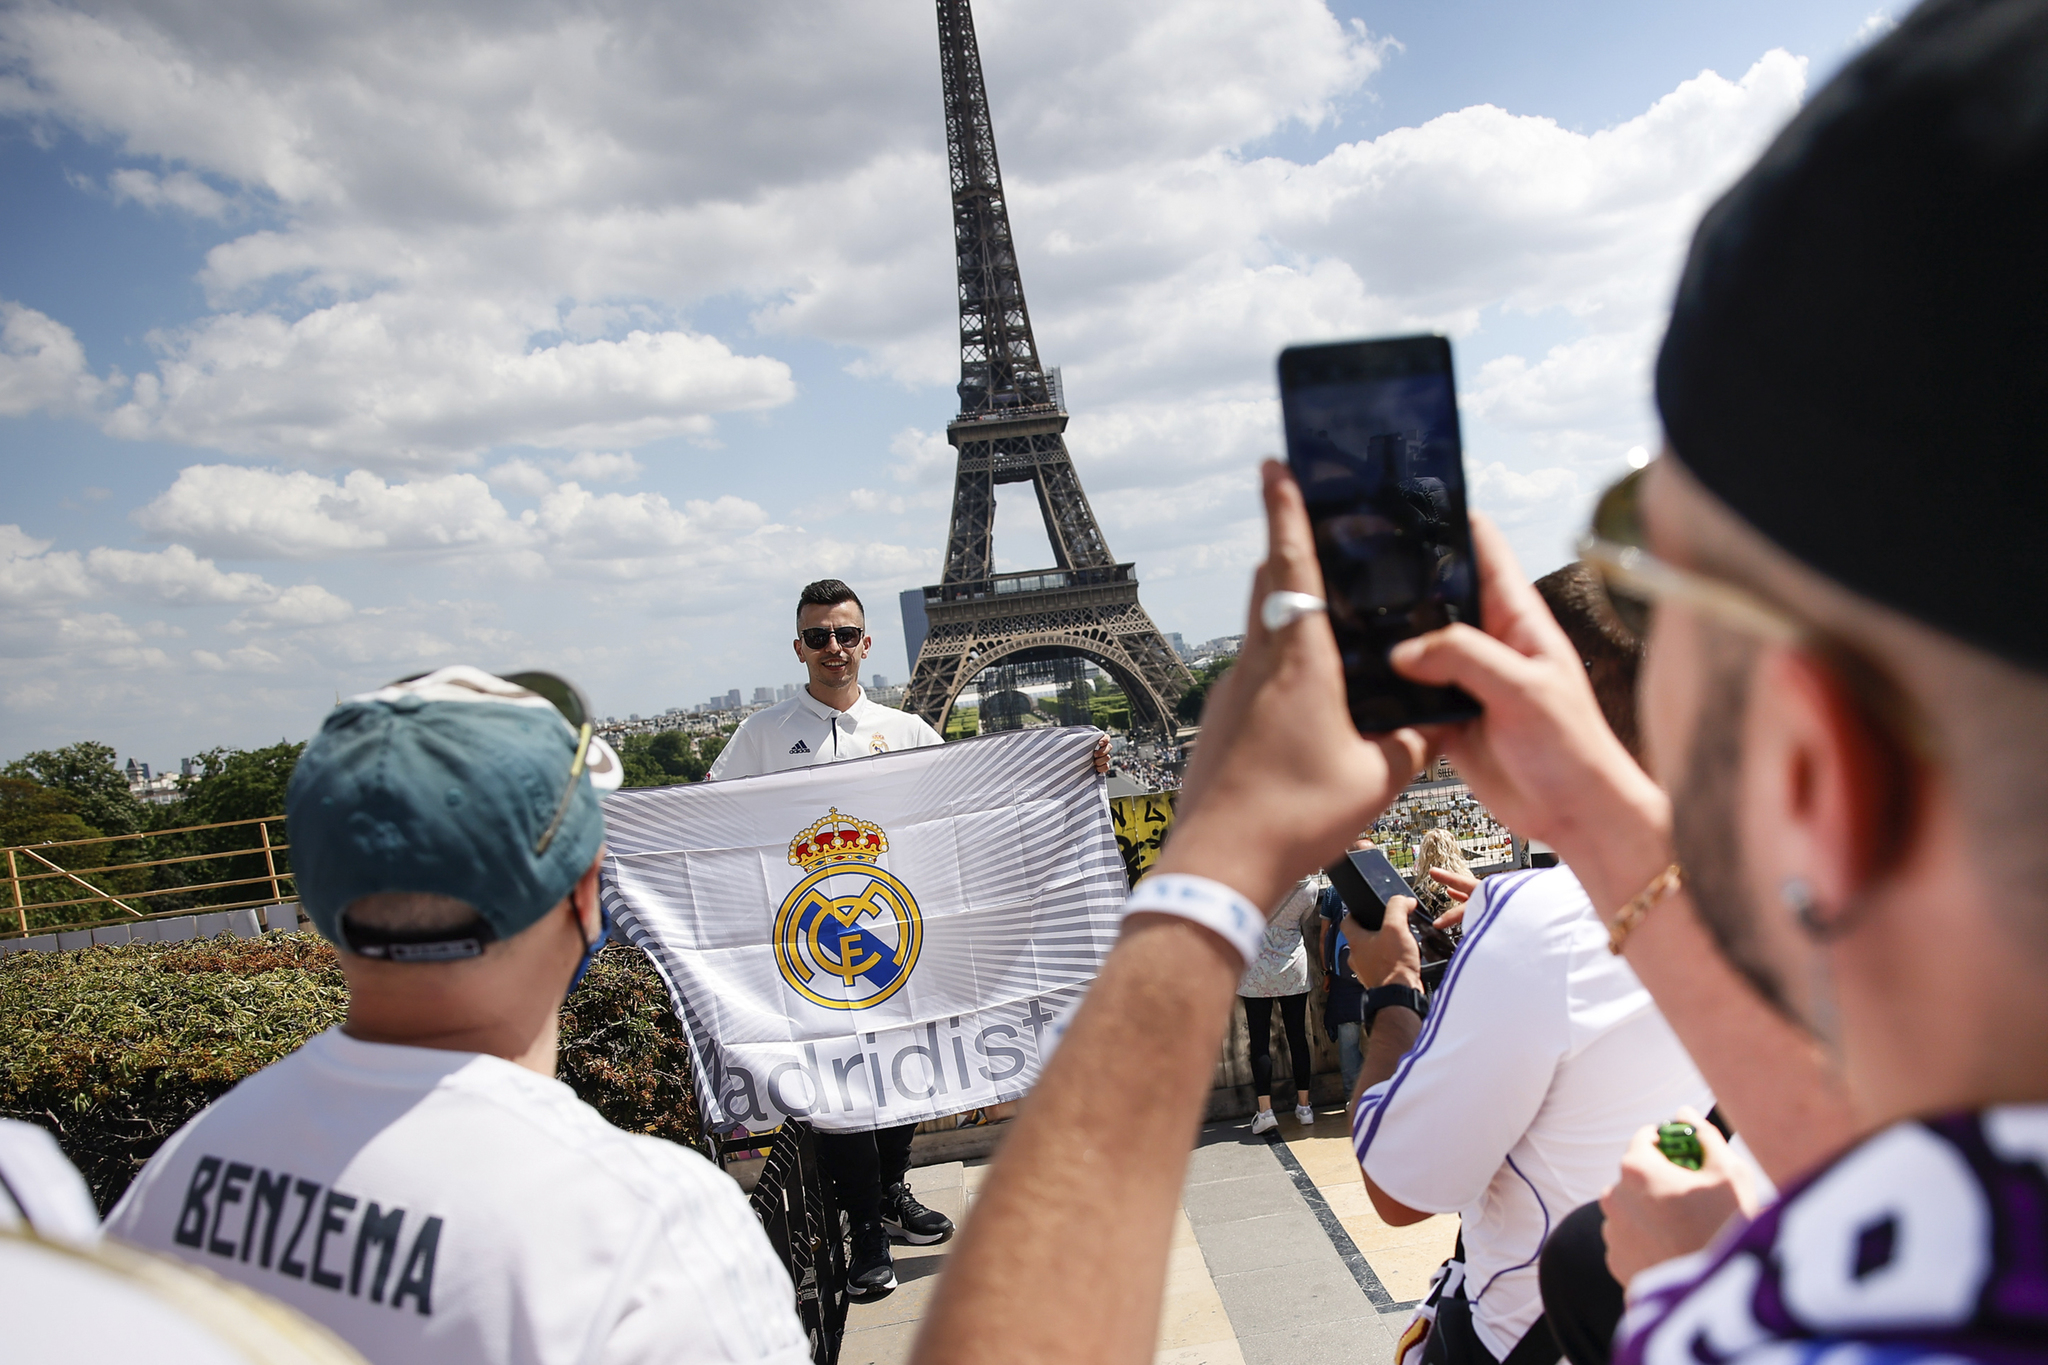 Real Madrid supporters pose for a photograph near the Eiffel Tower in Paris, Saturday, May 28, 2022 ahead of Saturday's  lt;HIT gt;Champions lt;/HIT gt;  lt;HIT gt;League lt;/HIT gt; final soccer match between Liverpool and Real Madrid at the Stade de France. (AP Photo/Thomas Padilla)